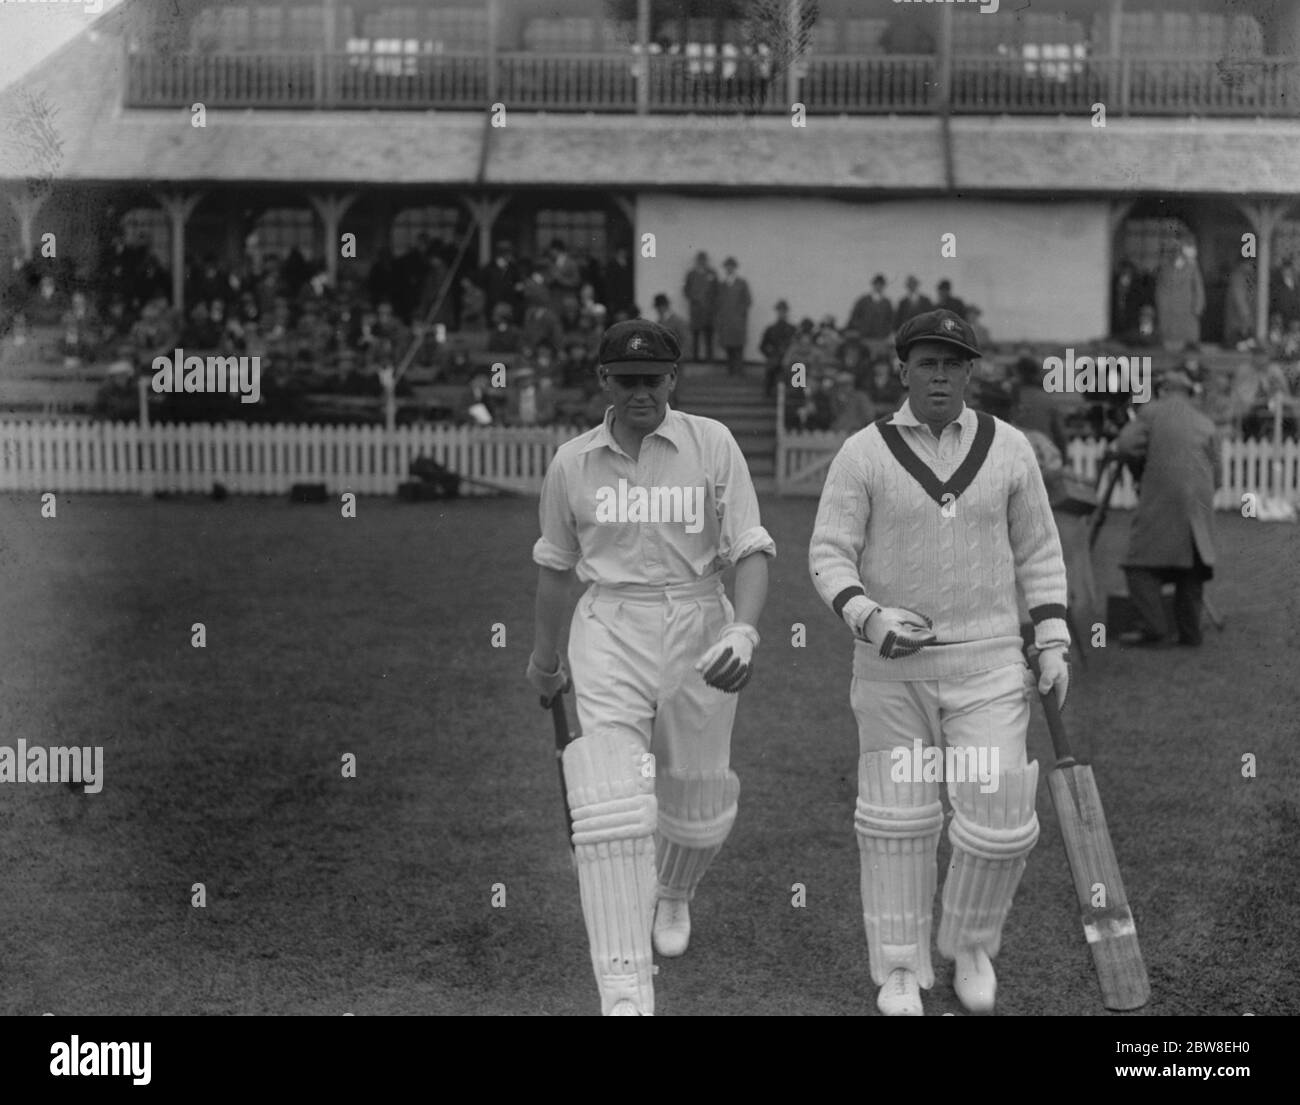 Australians first match in London . Fonsford and Woodfull coming out to open the innings for the Australians against Essex at Leyton . 7 May 1930 Stock Photo